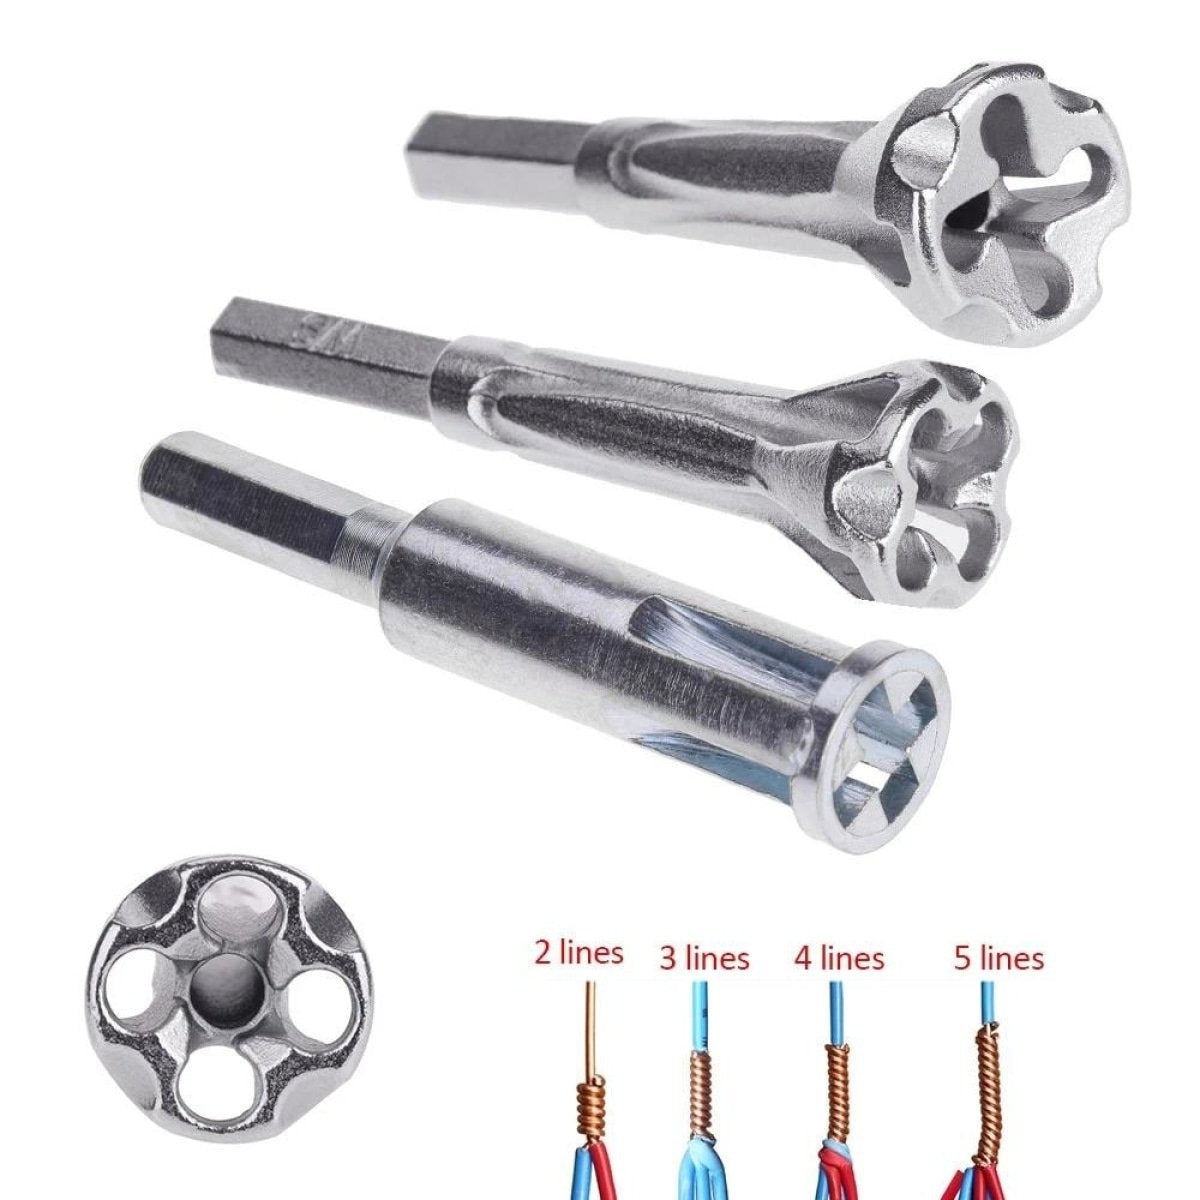 Electrical Cable Wire Twist Tool Hole Universal Automatic Connector - 1.5-2.5 Manganese - Asia Sell